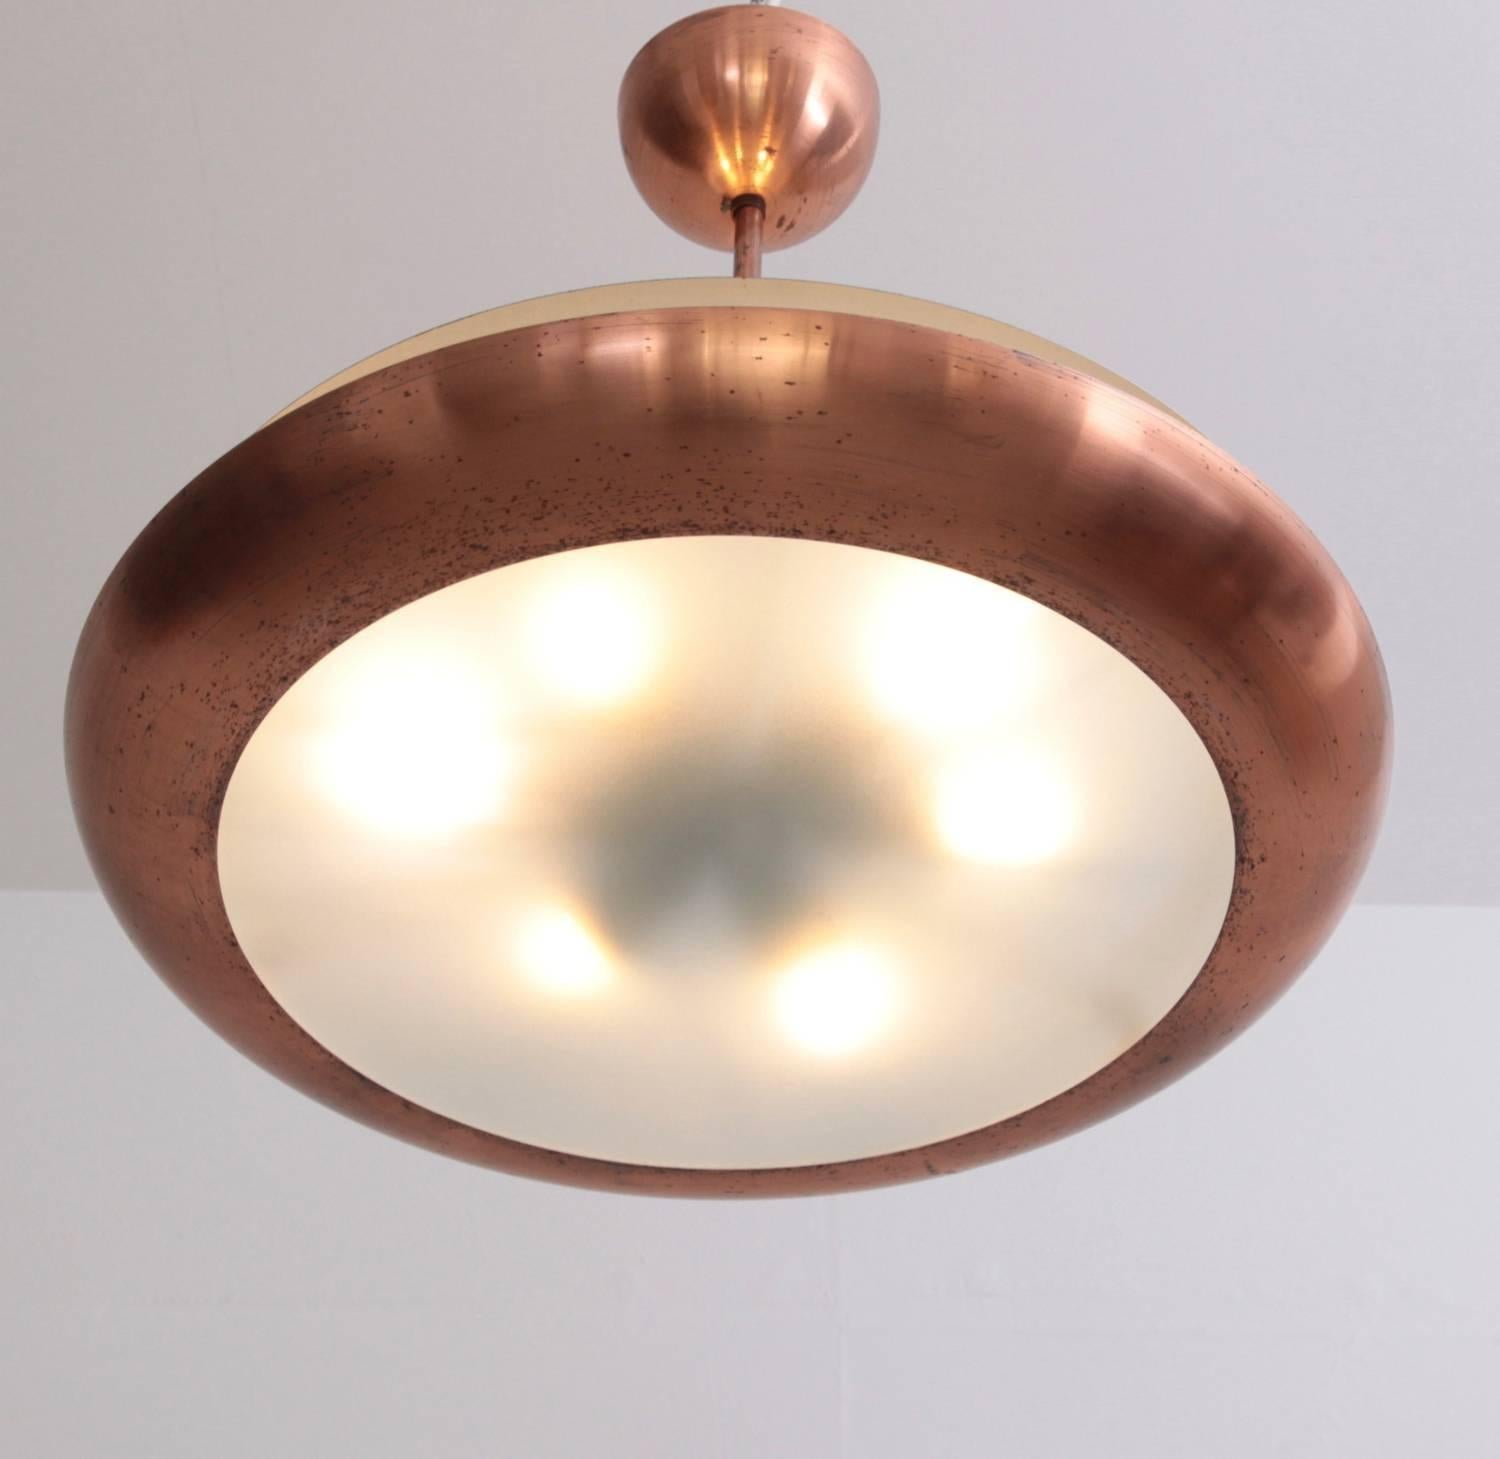 Bauhaus style copper lamp in very good original condition with 6 x E27 / Model A fittings. Absolute stunning early modern lighting.
To be on the safe side, the lamp should be checked locally by a specialist concerning local requirements.

